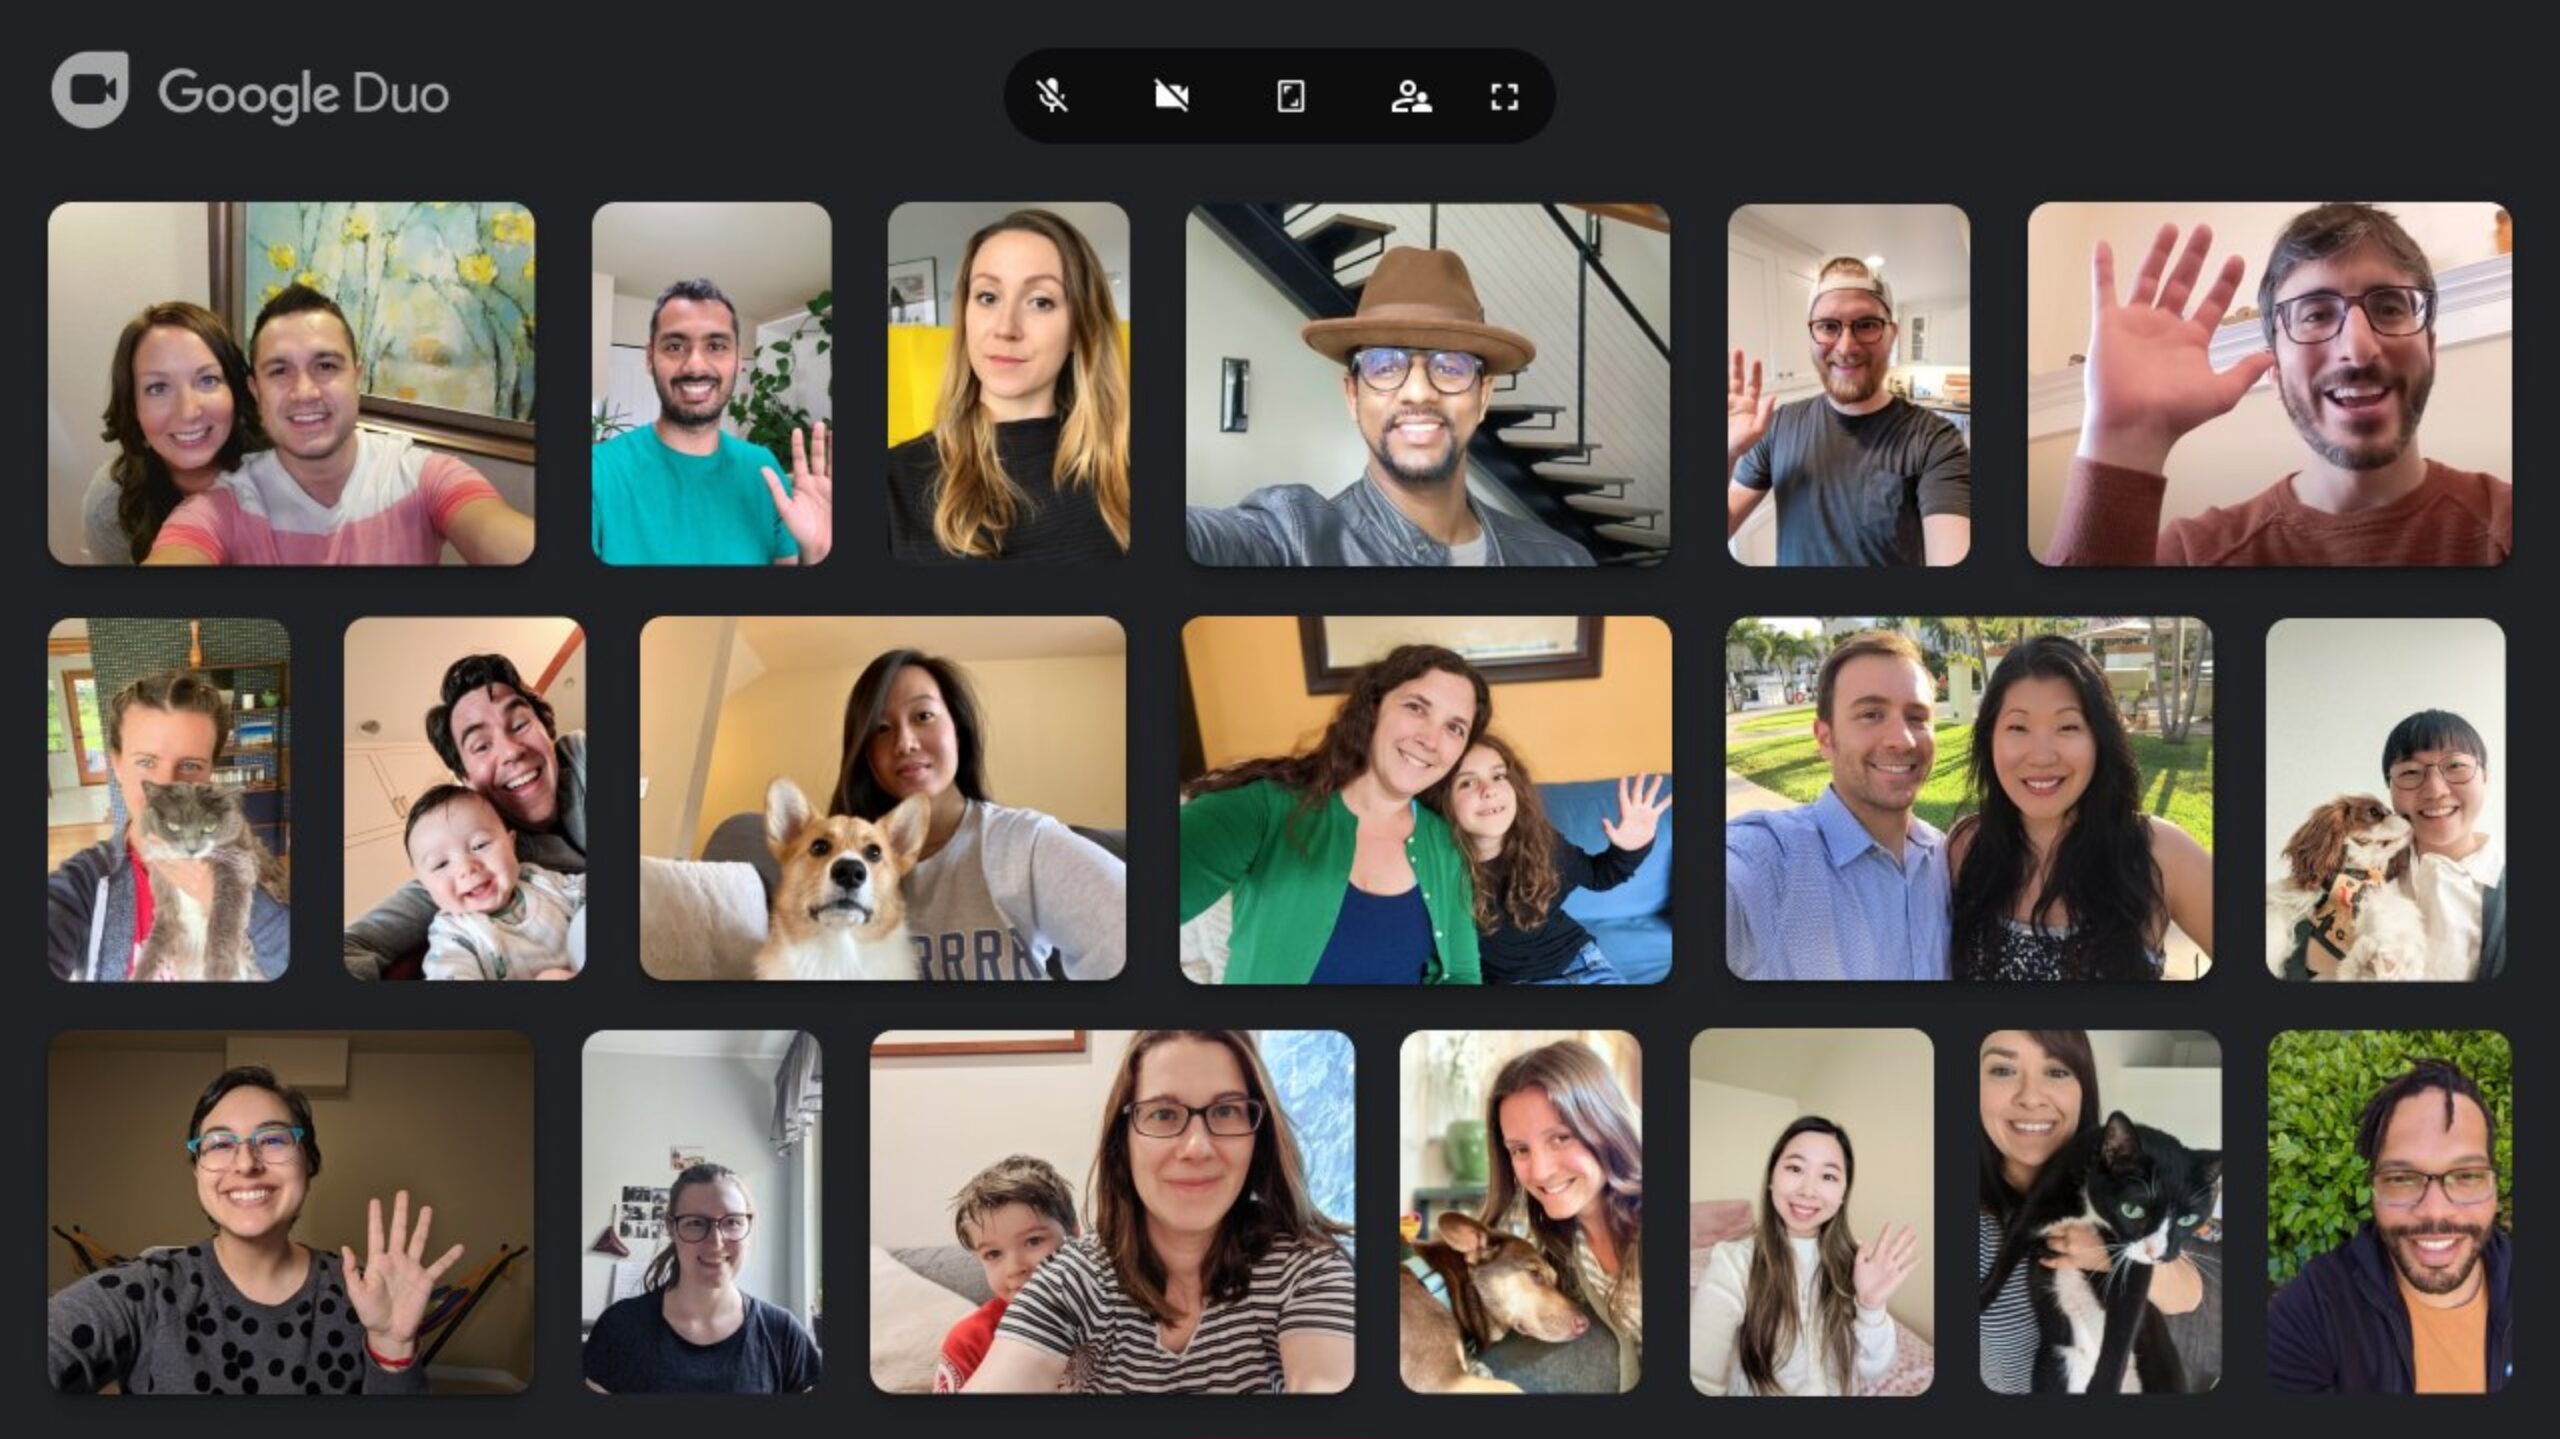 Google Duo now supports group video calls with up to 32 participants on the web